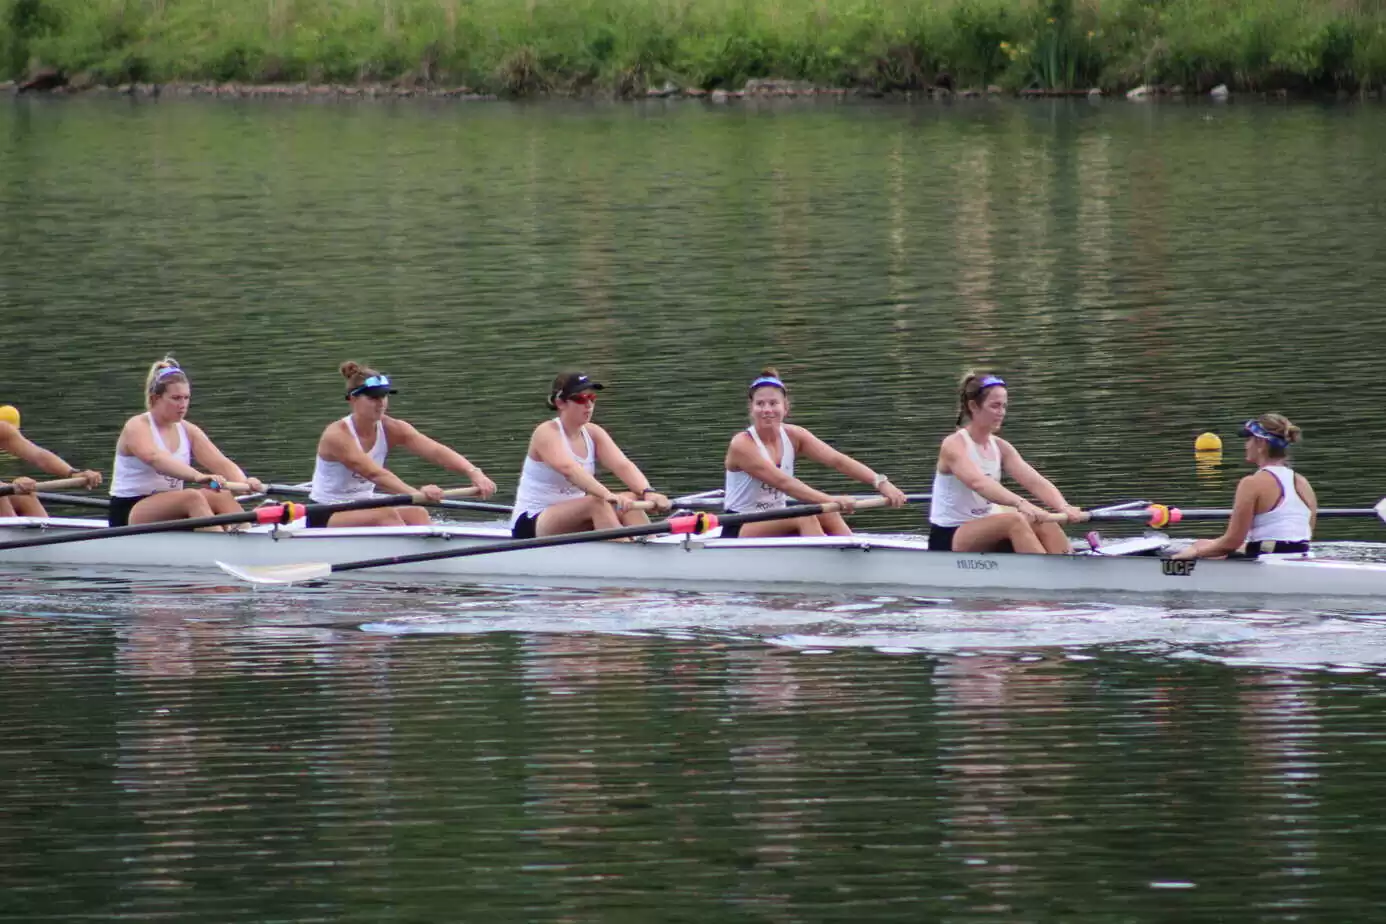 Women sweep rowing team with a coxswain